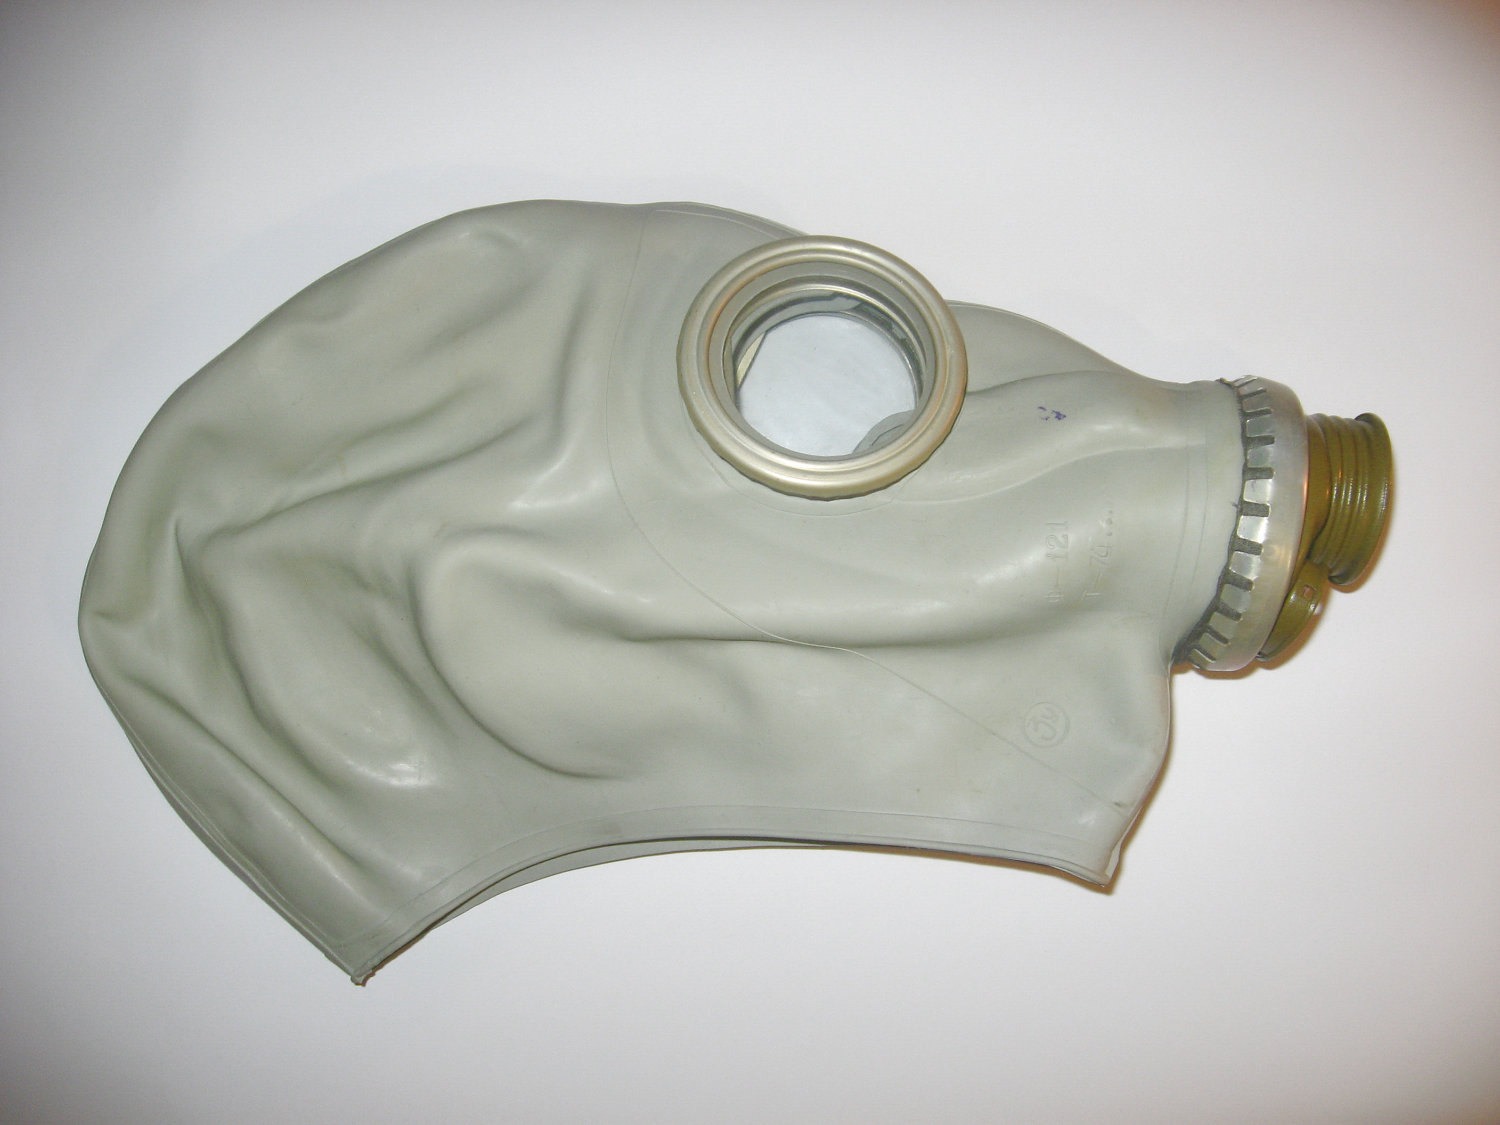 Vintage GP-5 Gas Mask is a Soviet-made ,Brand New, cyber mask, cyber goth respirator steampunk buy now online